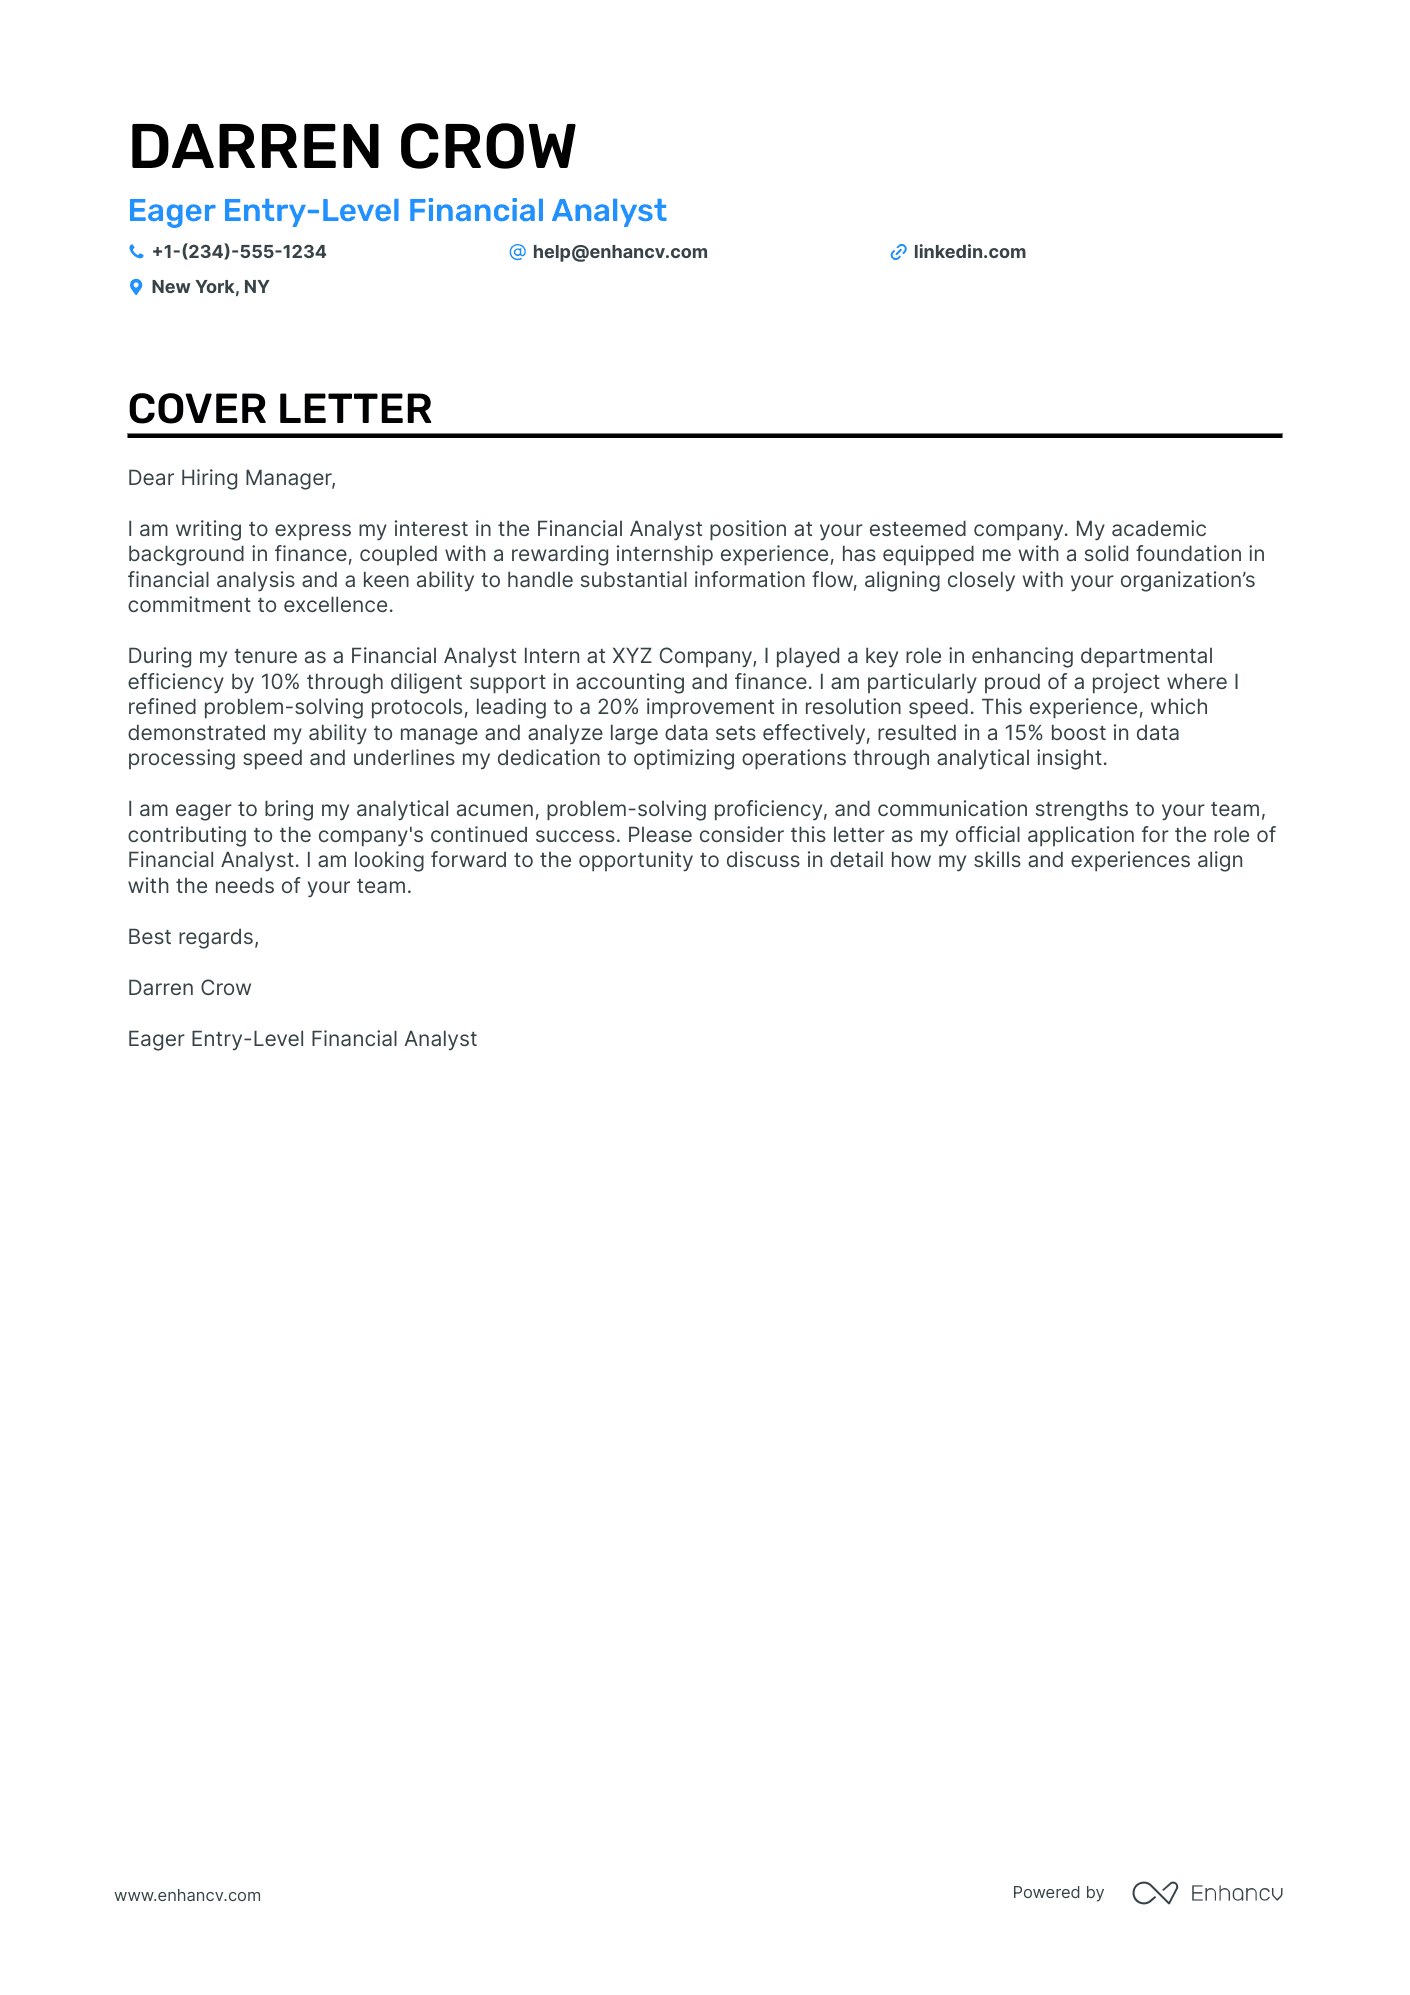 how to write cover letter for financial analyst job